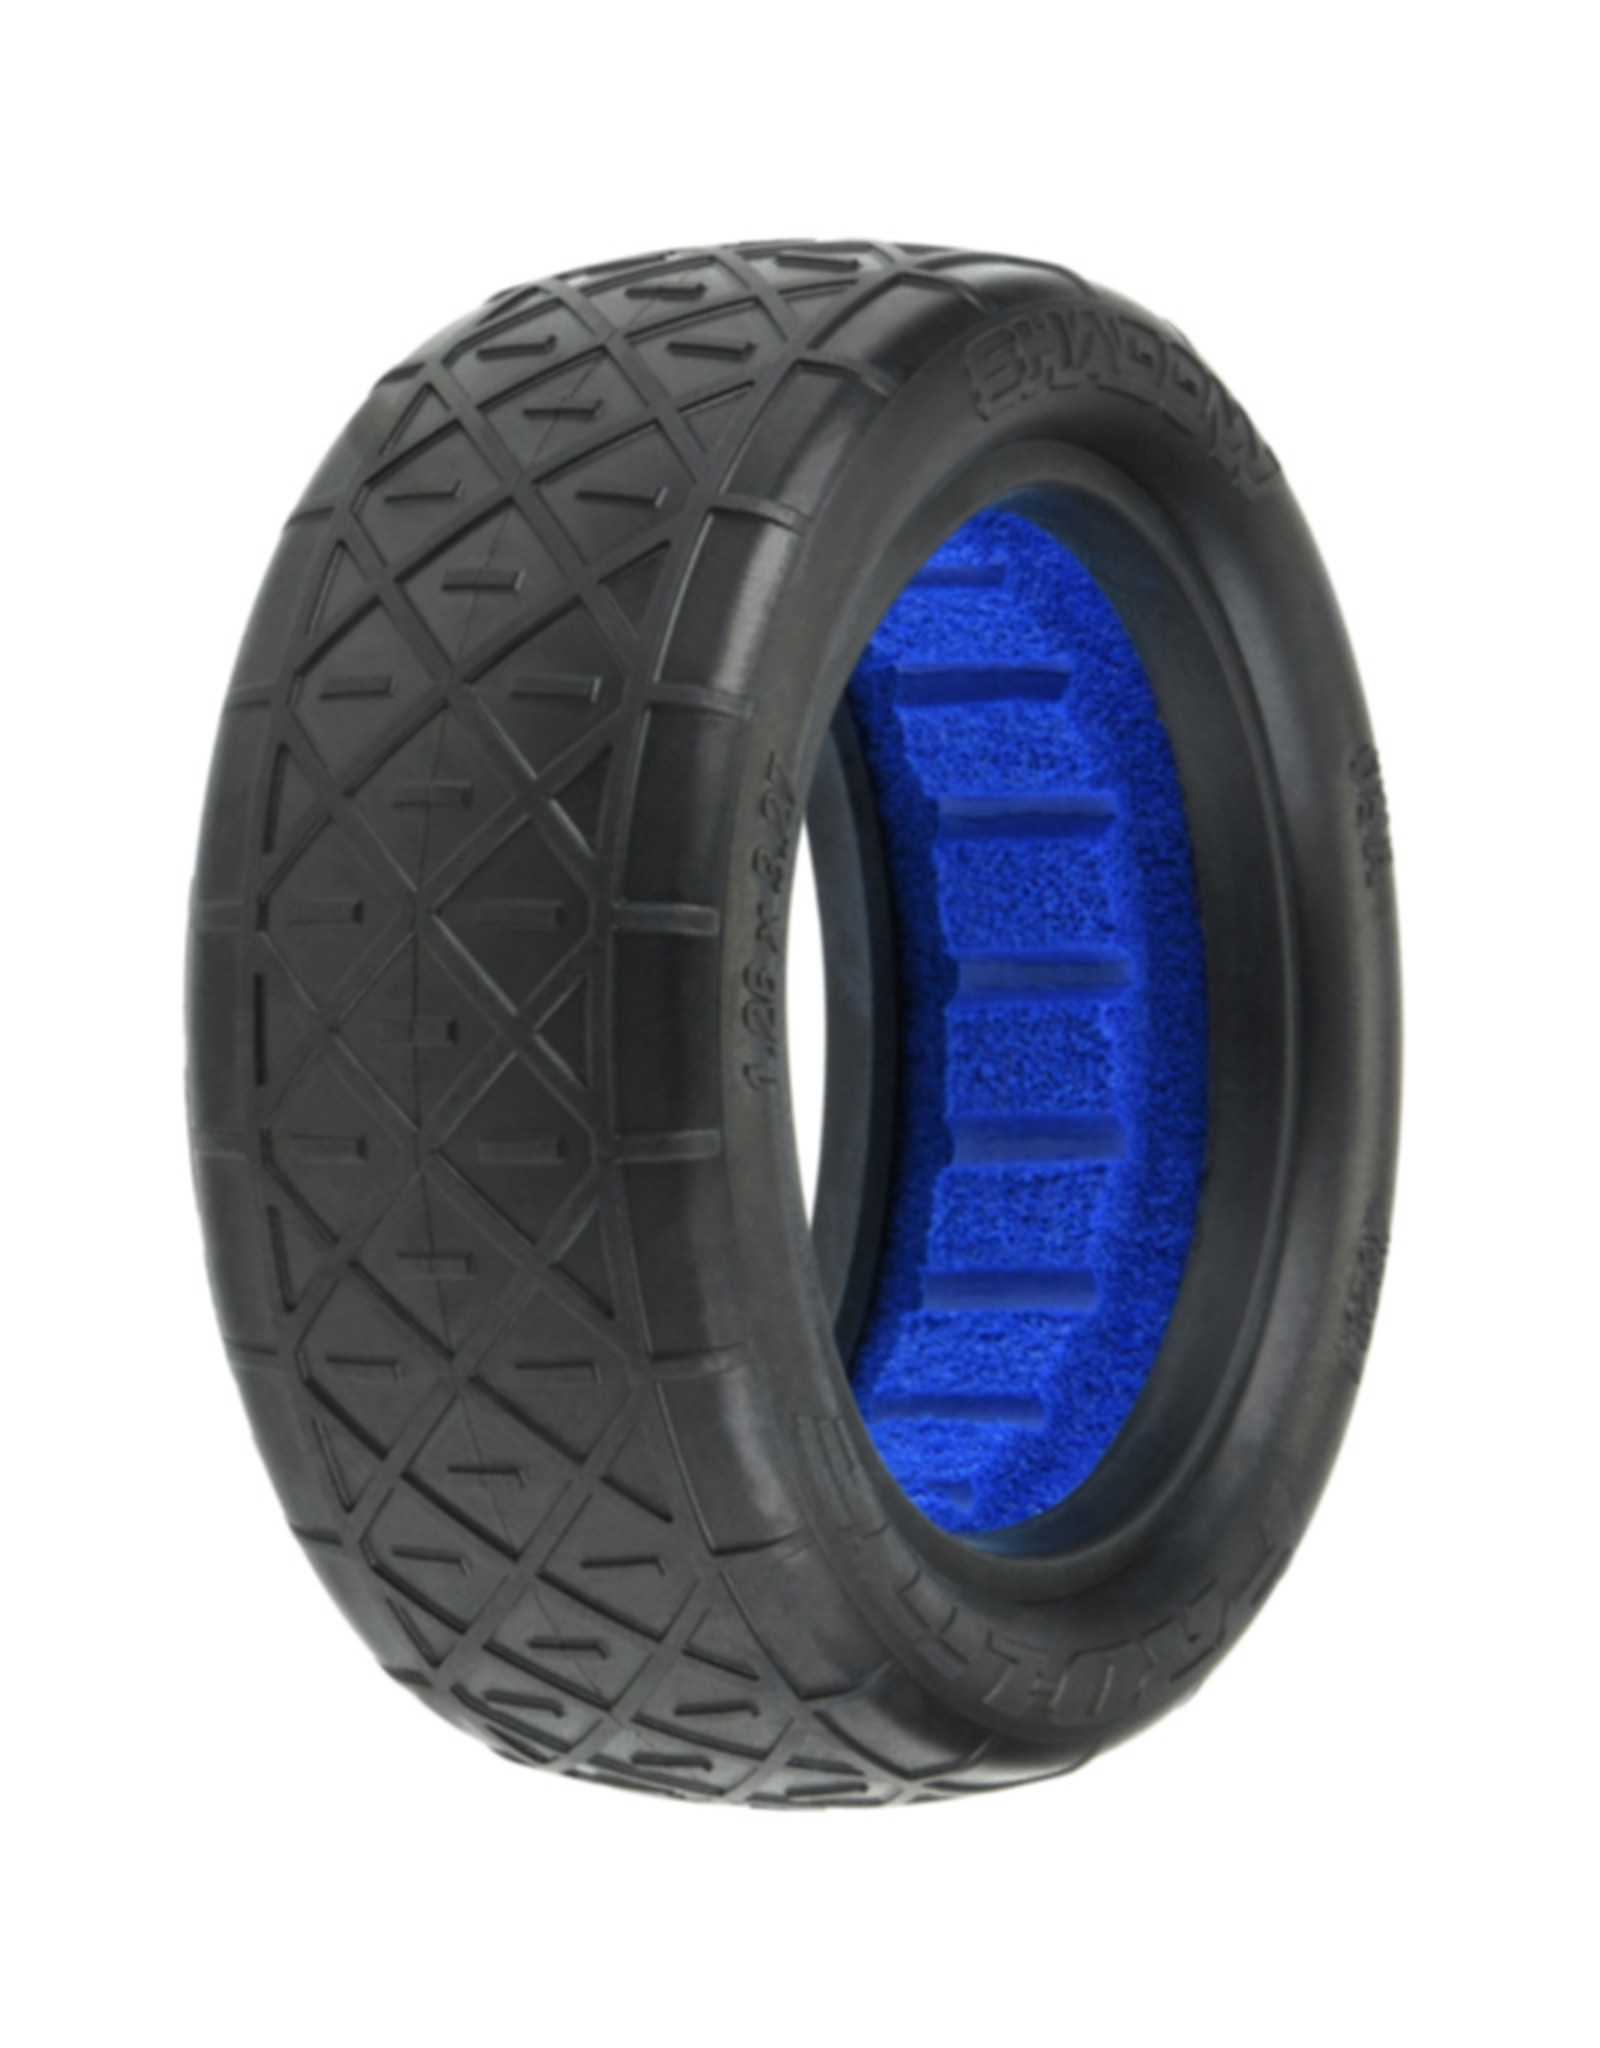 Pro-Line Racing PRO8294203 Shadow 2.2" 4WD S3 Buggy Front Tires (2)